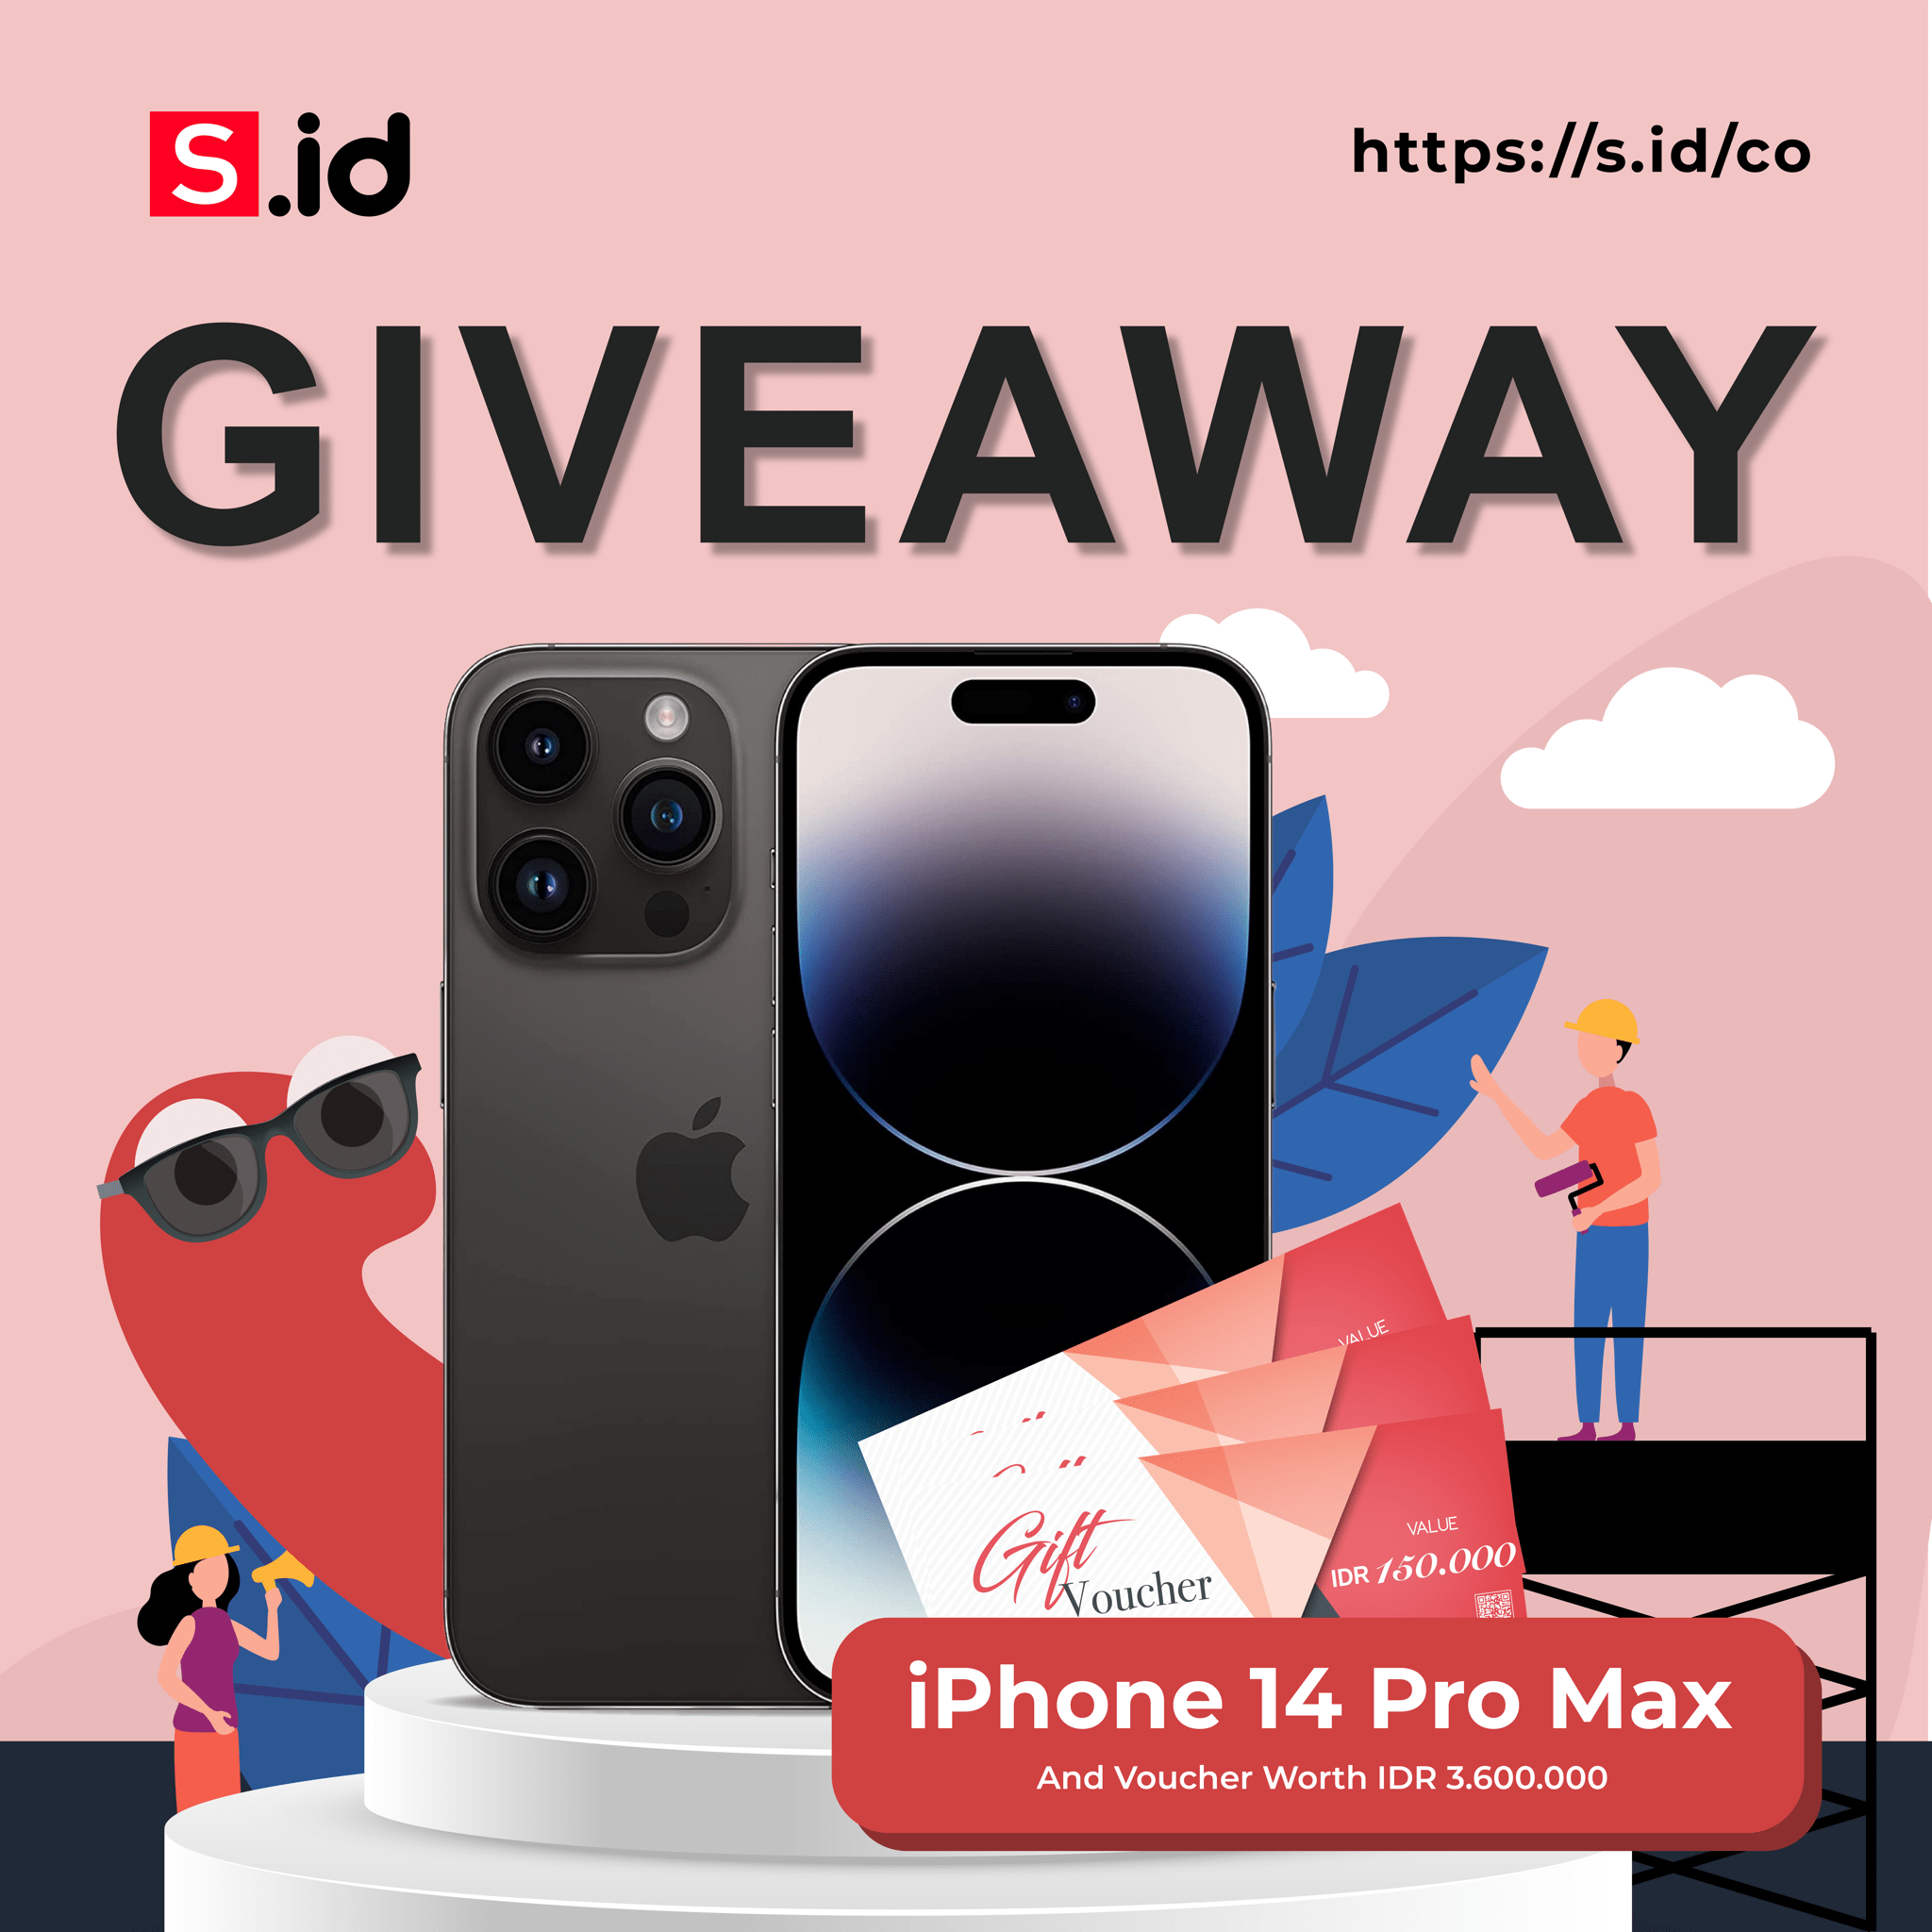 Win iPhone 14 Pro Max & Voucher Giveaway 2023